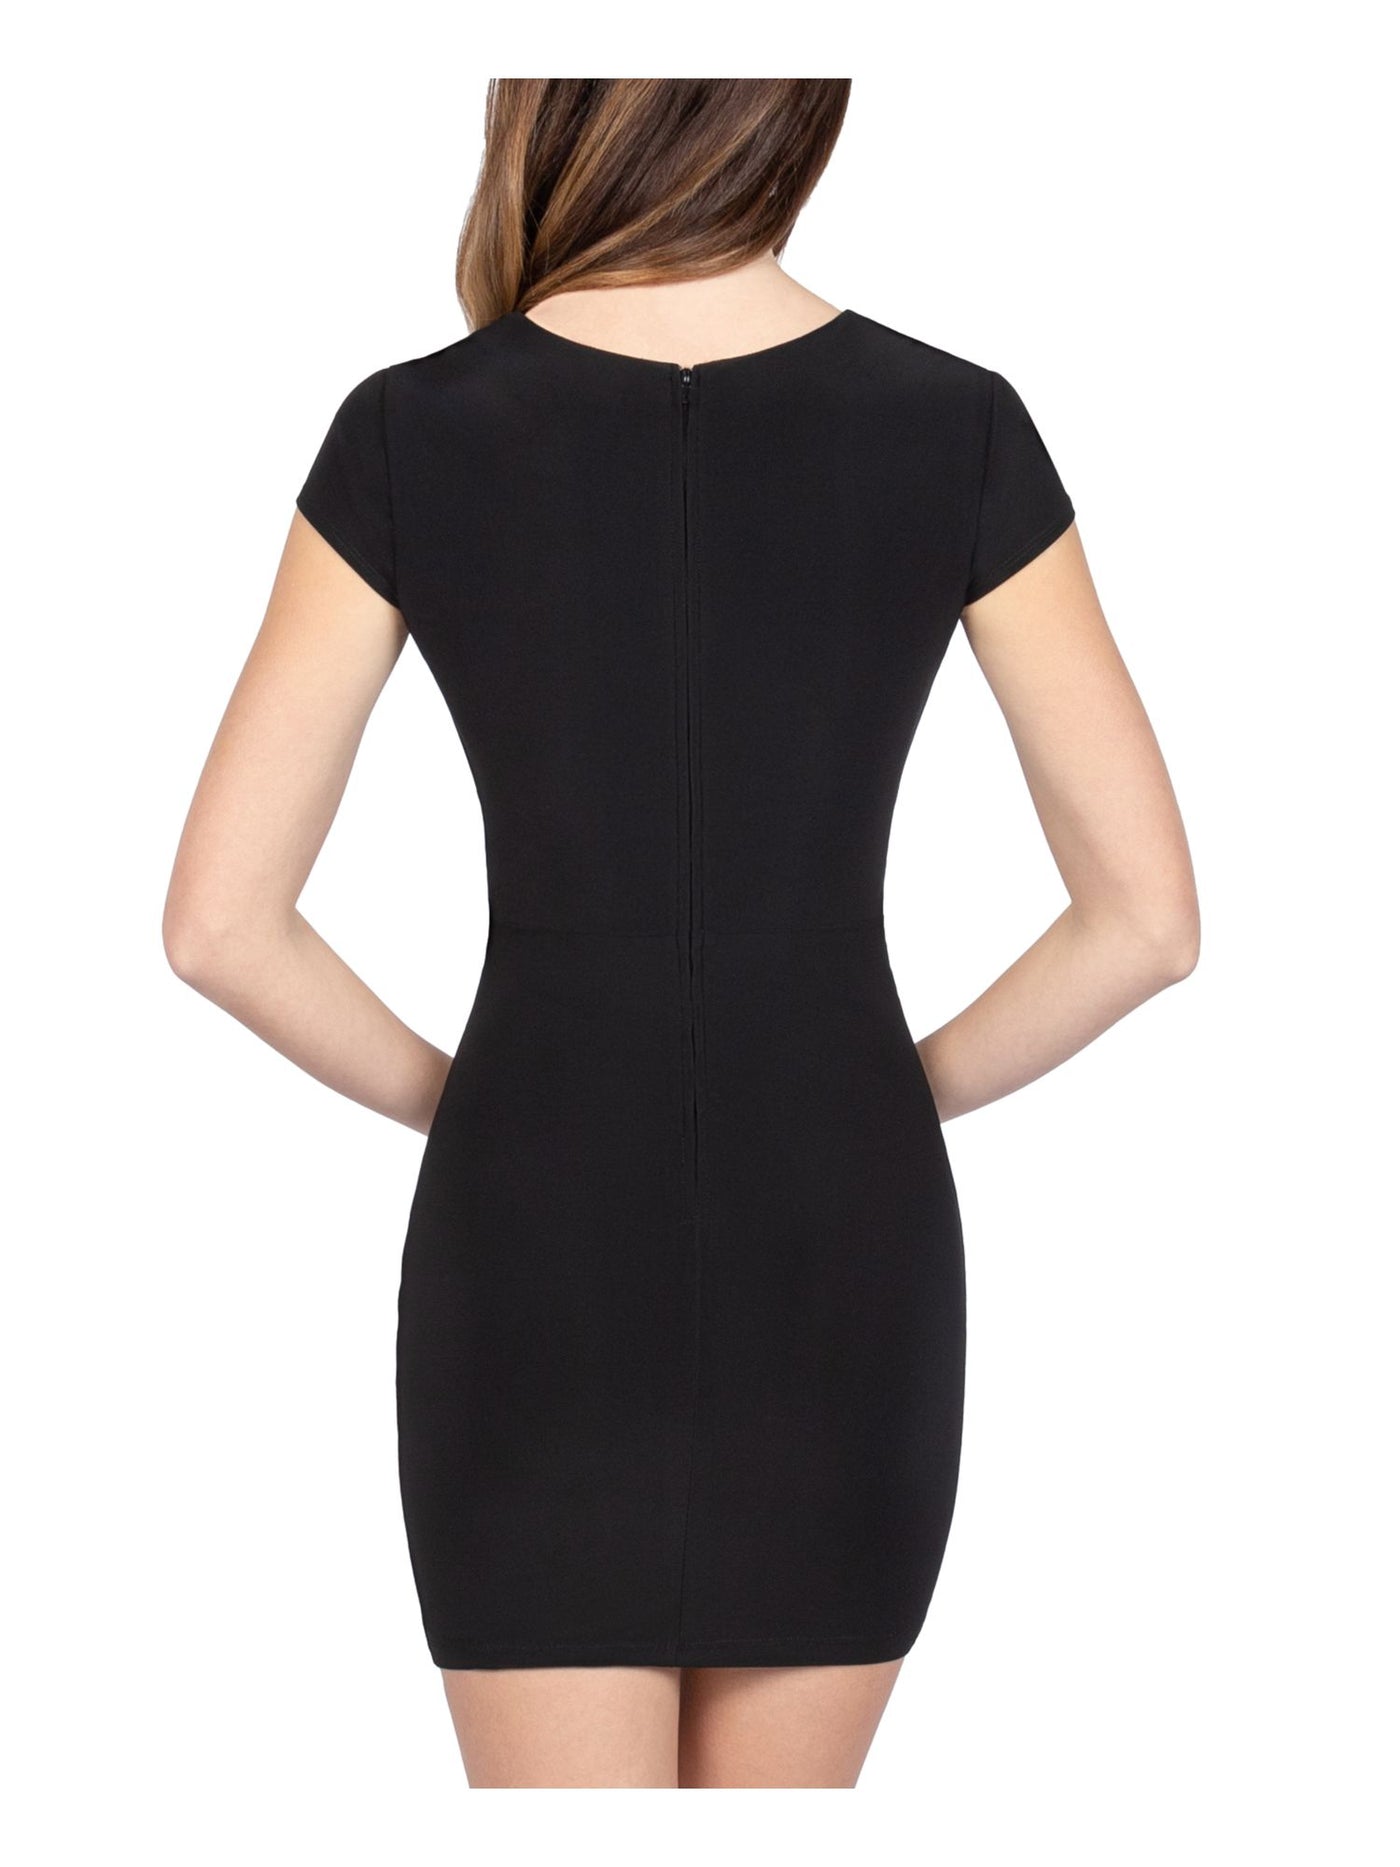 B DARLIN Womens Stretch Zippered Cut Out Cap Sleeve Crew Neck Above The Knee Cocktail Body Con Dress